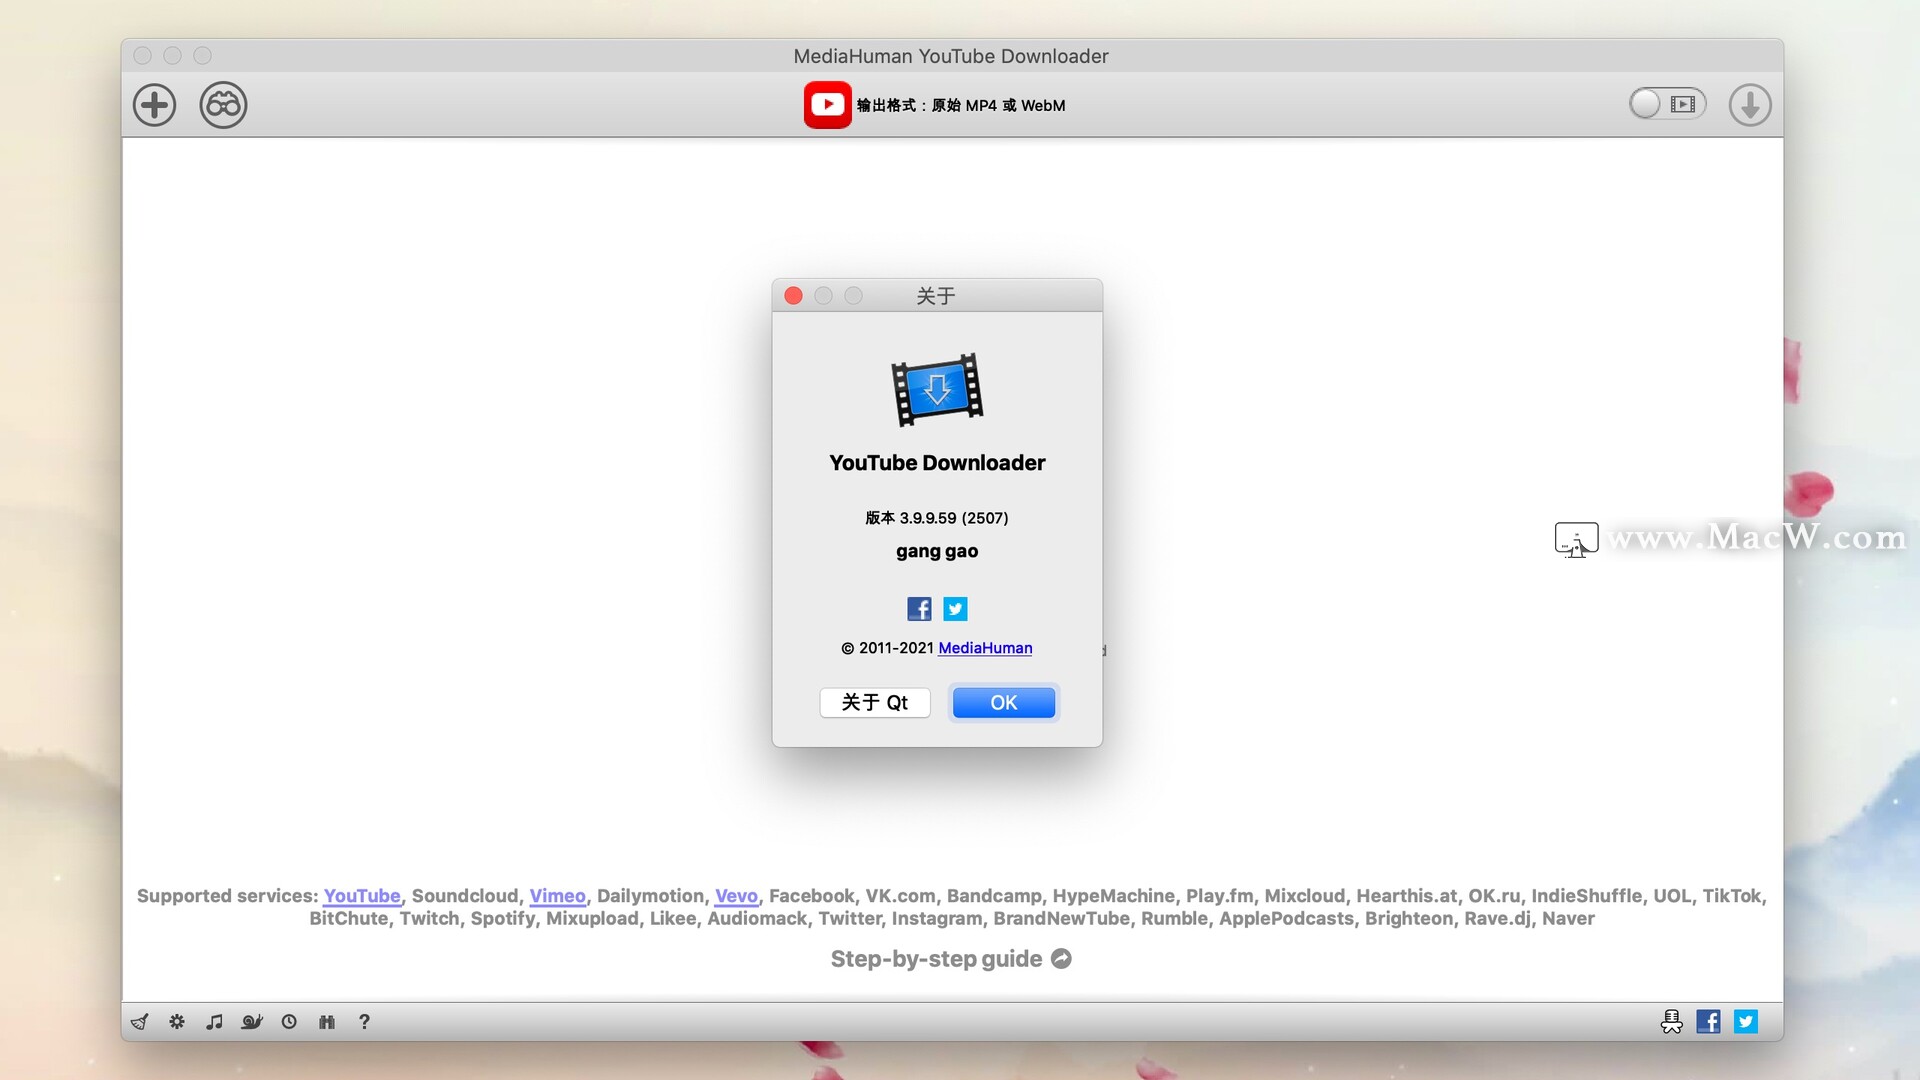 download the last version for apple MediaHuman YouTube Downloader 3.9.9.86.2809